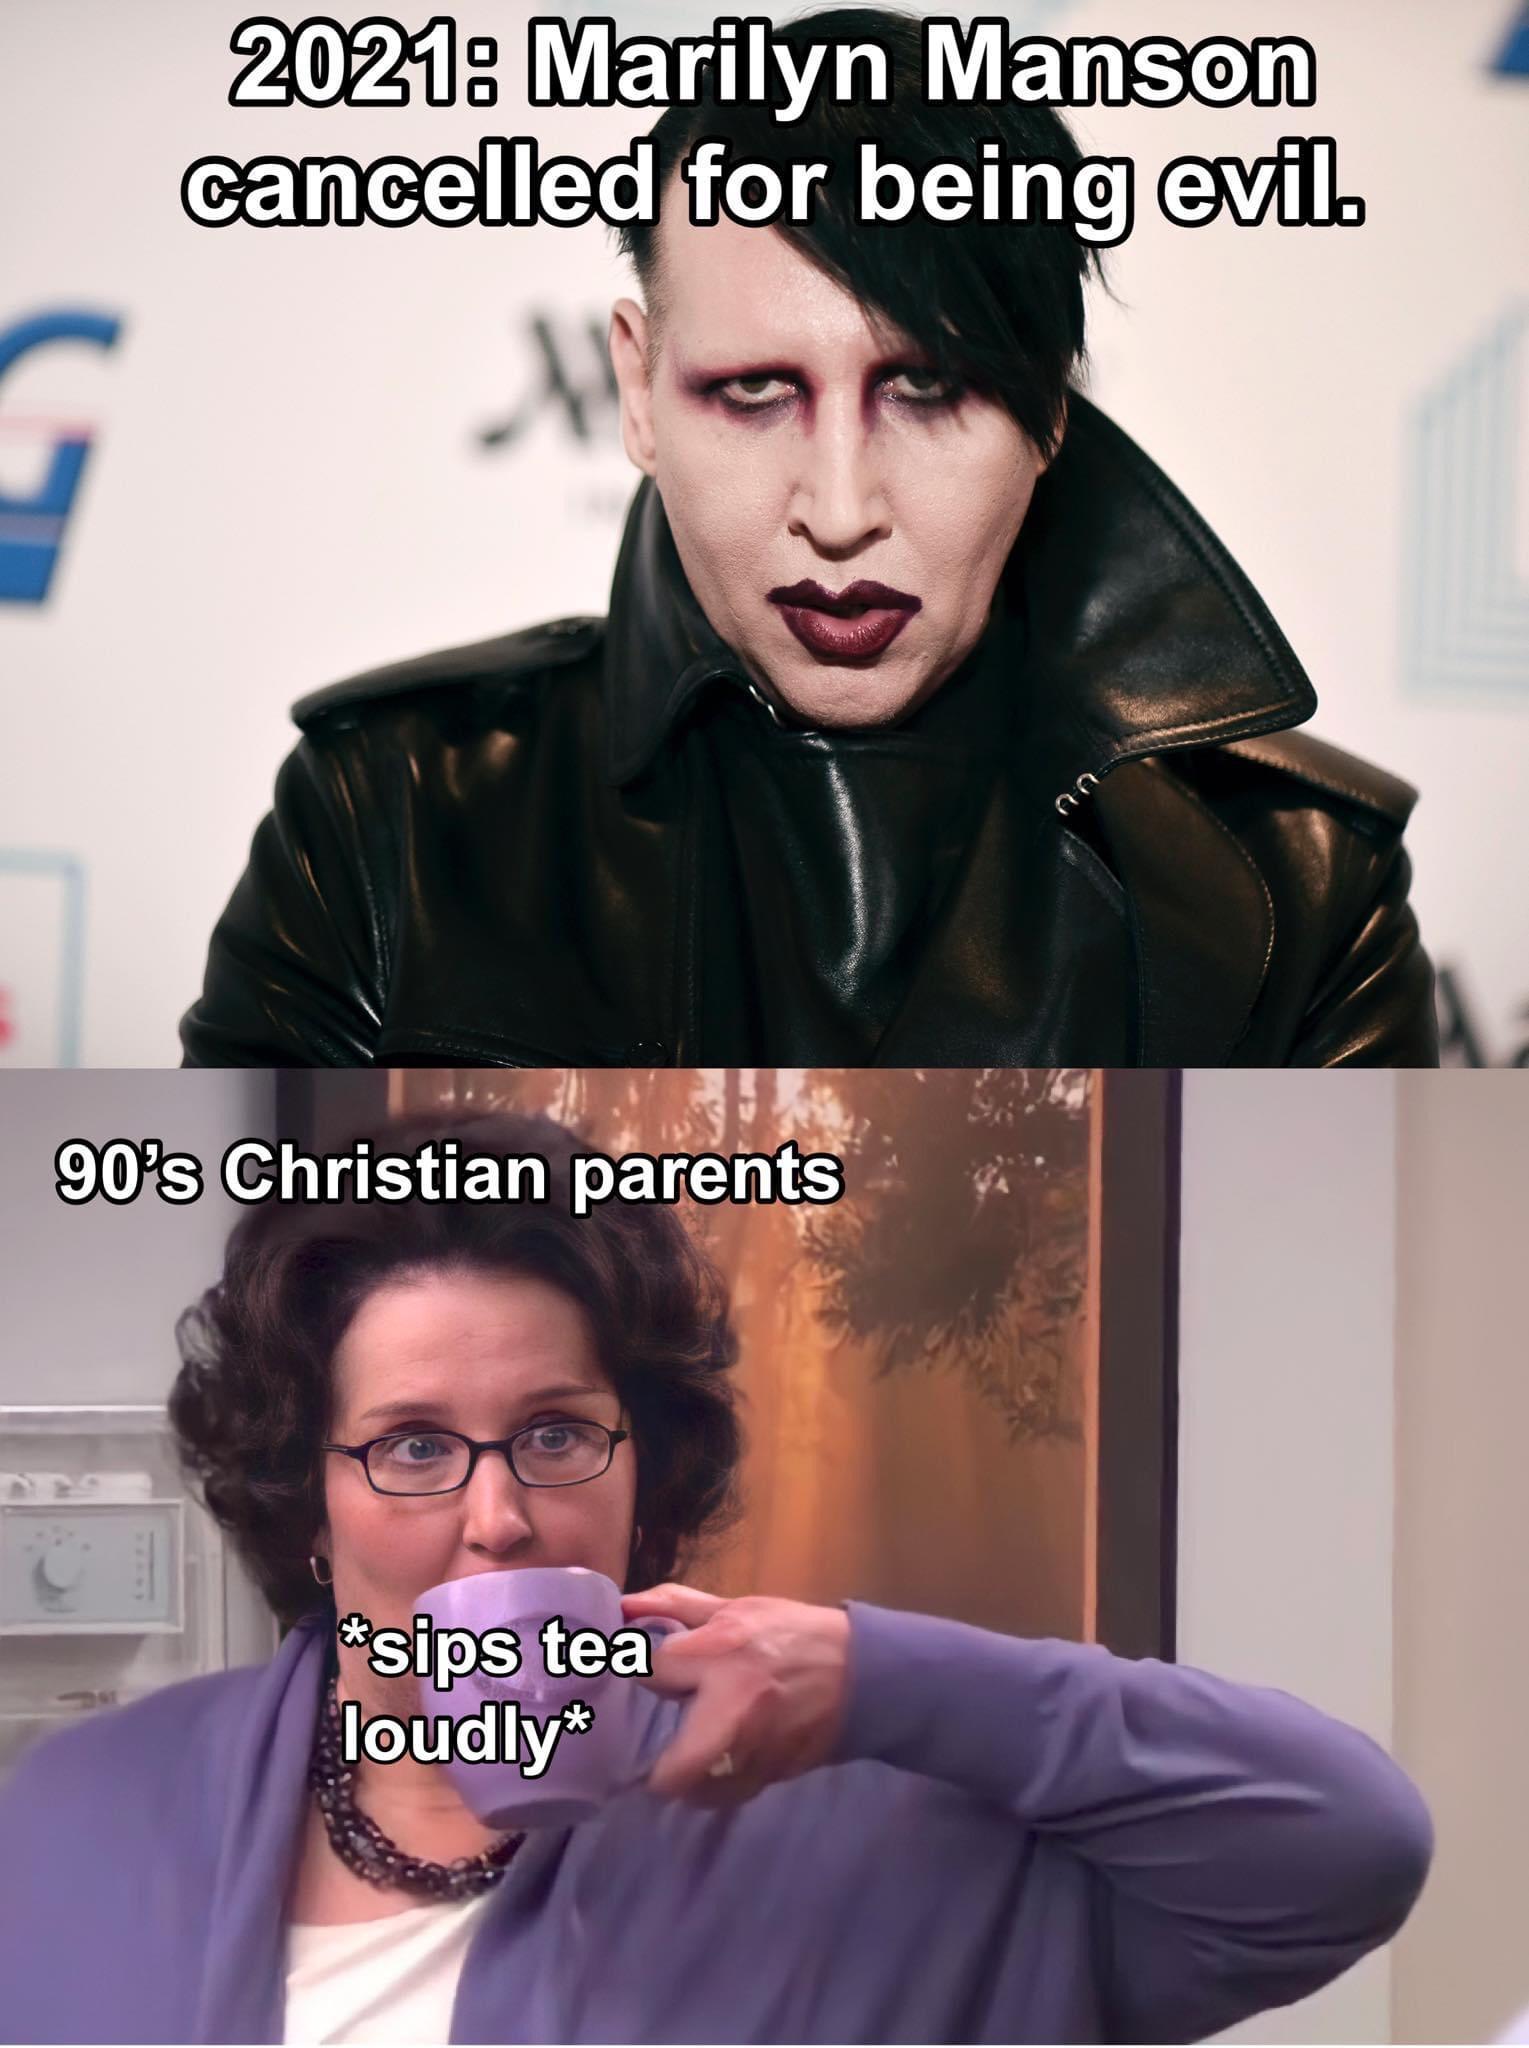 funny pics and memes - 2021 Marilyn Manson cancelled for being evil. - 90's Christian parents sips tea loudly